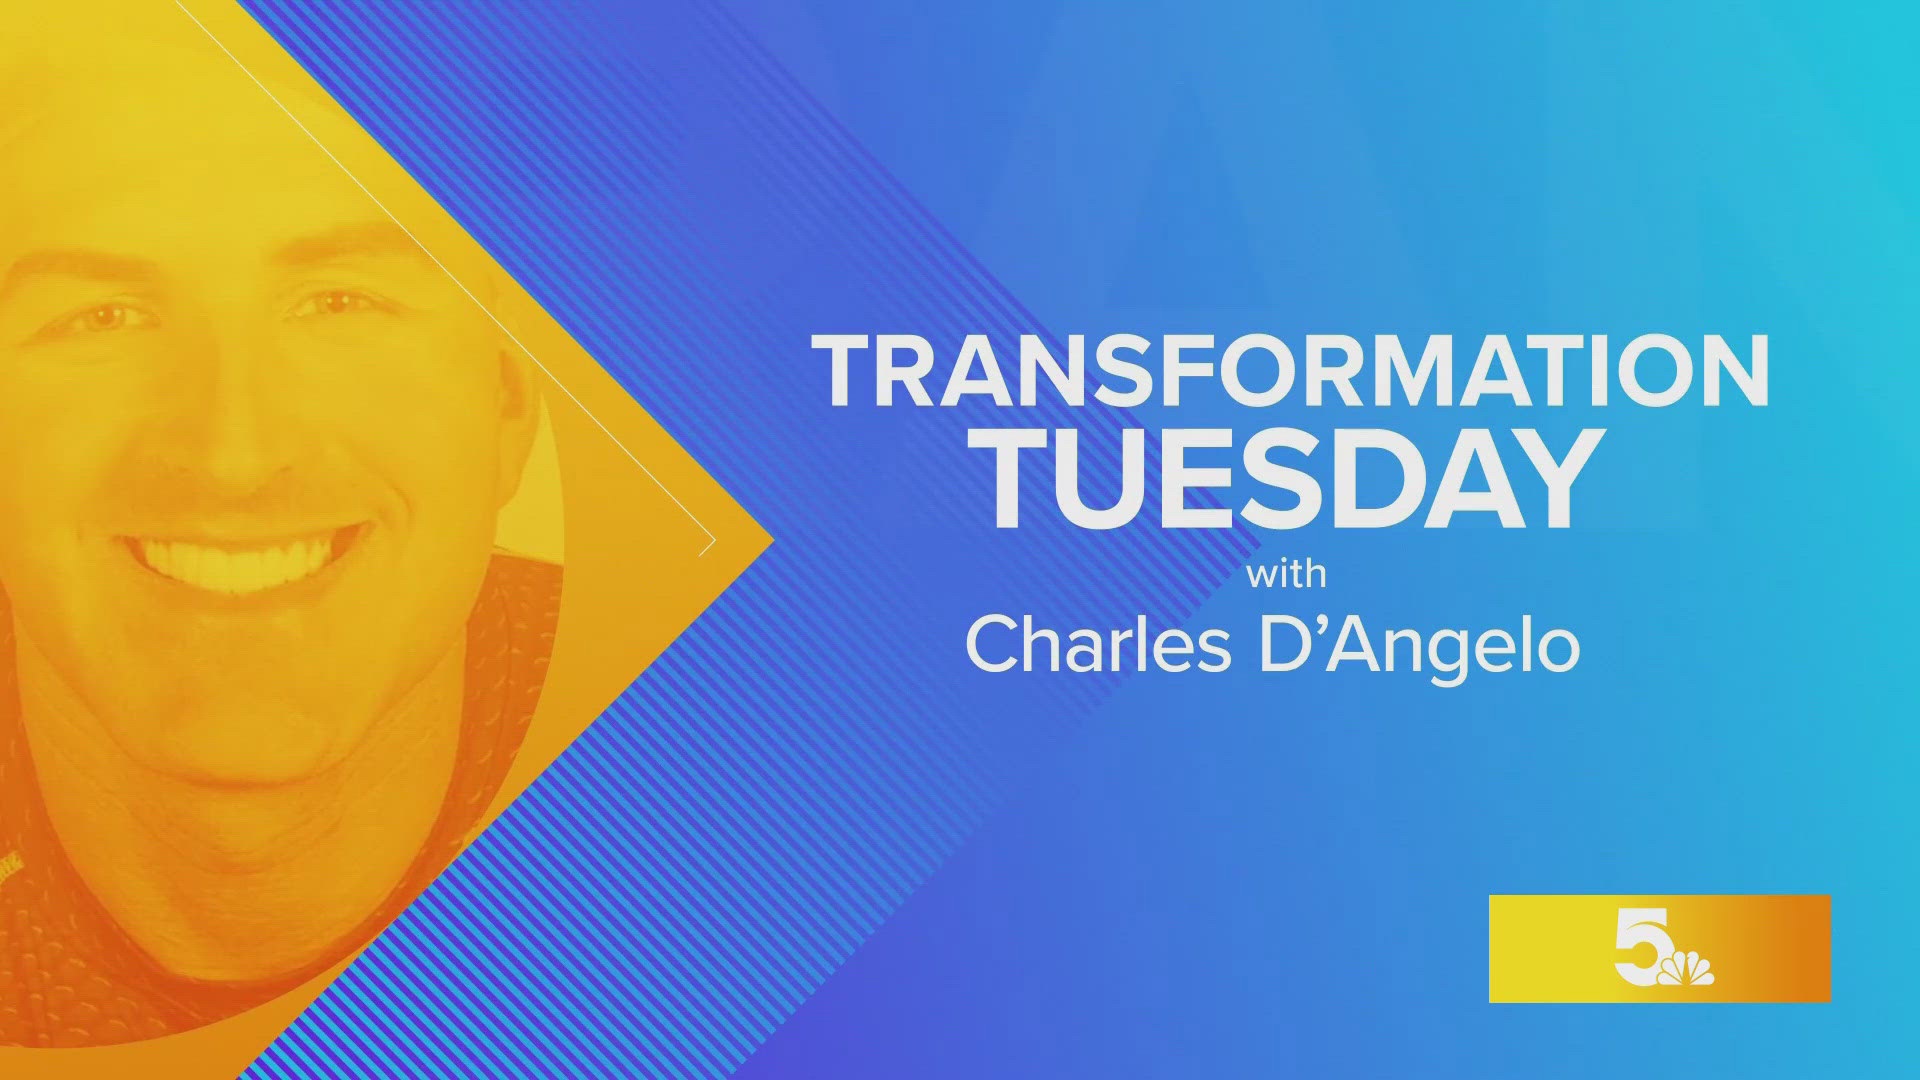 It's Transformation Tuesday and Keith Wagner joins us in the studio with a look at his weight loss journey and shares his experience working with Charles D'Angelo.